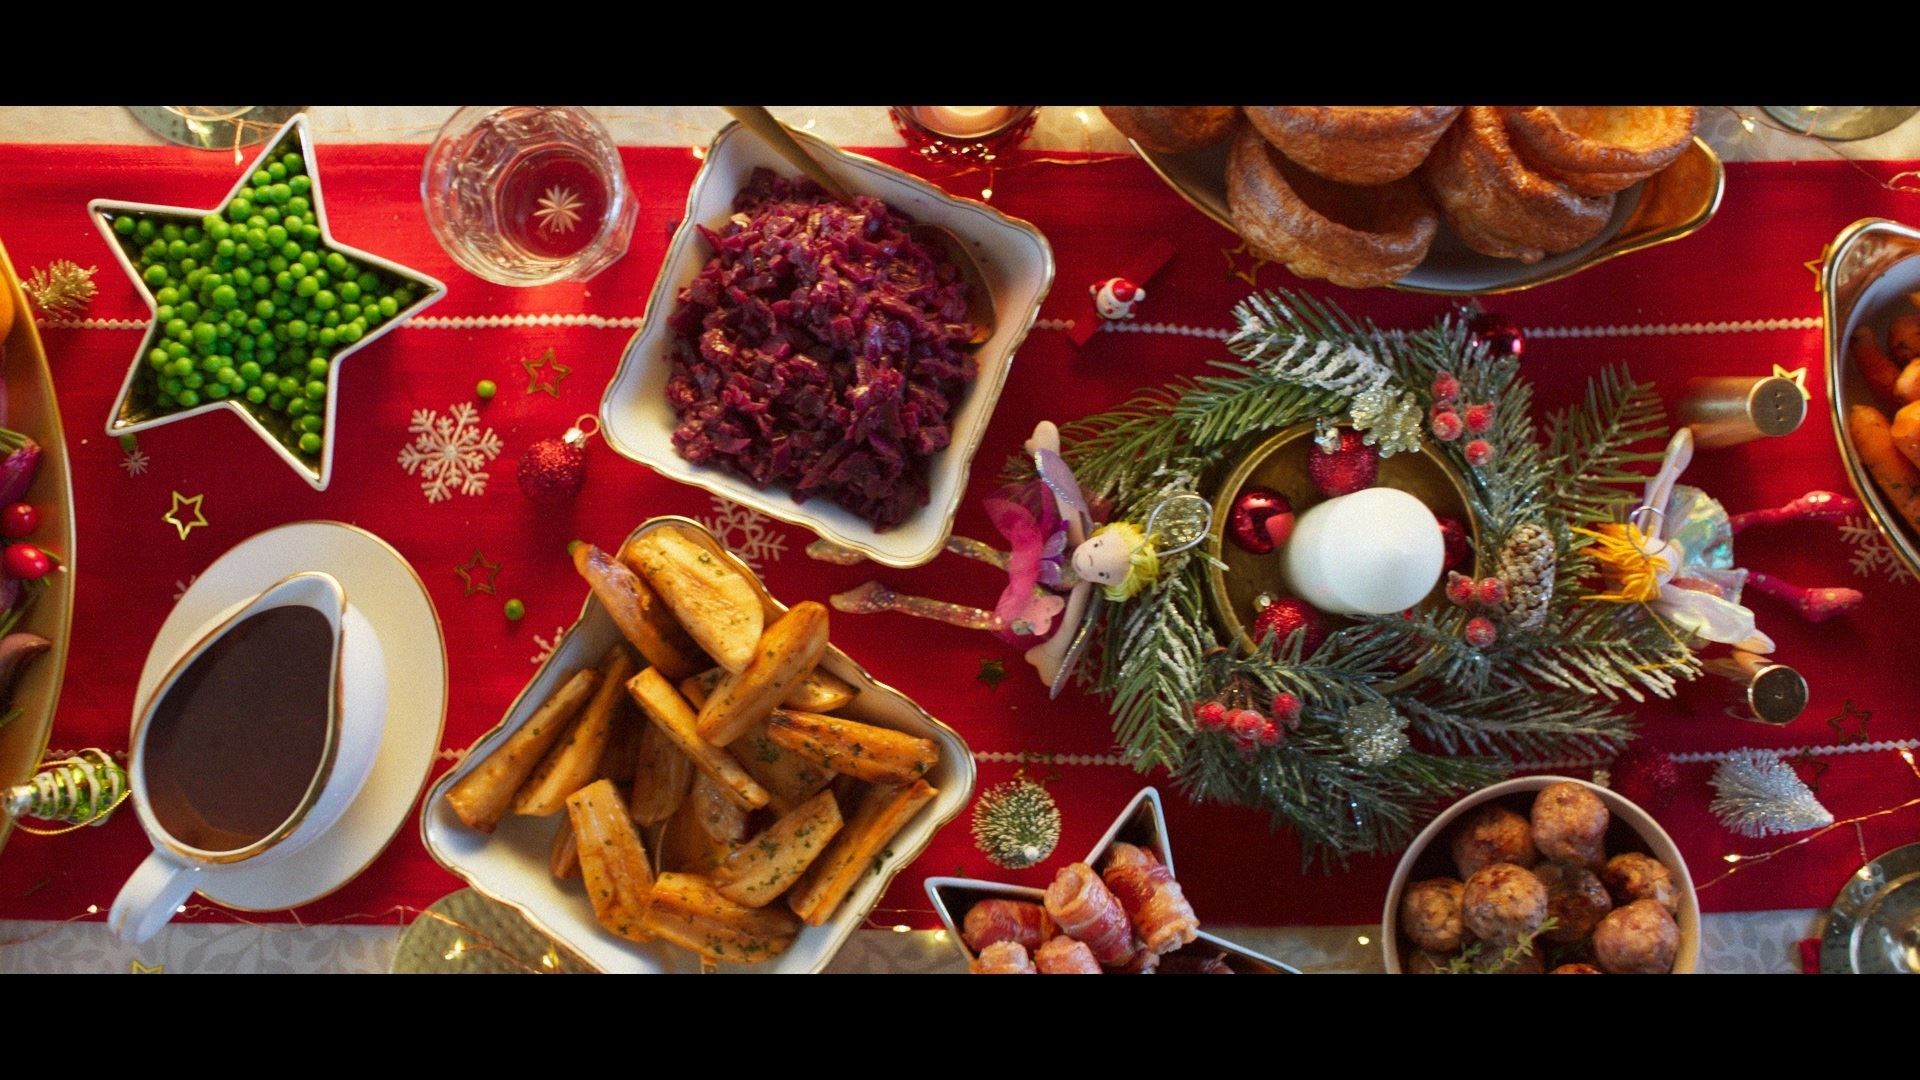 Lidl's Christmas you can believe in ad campaign is launched tonight.